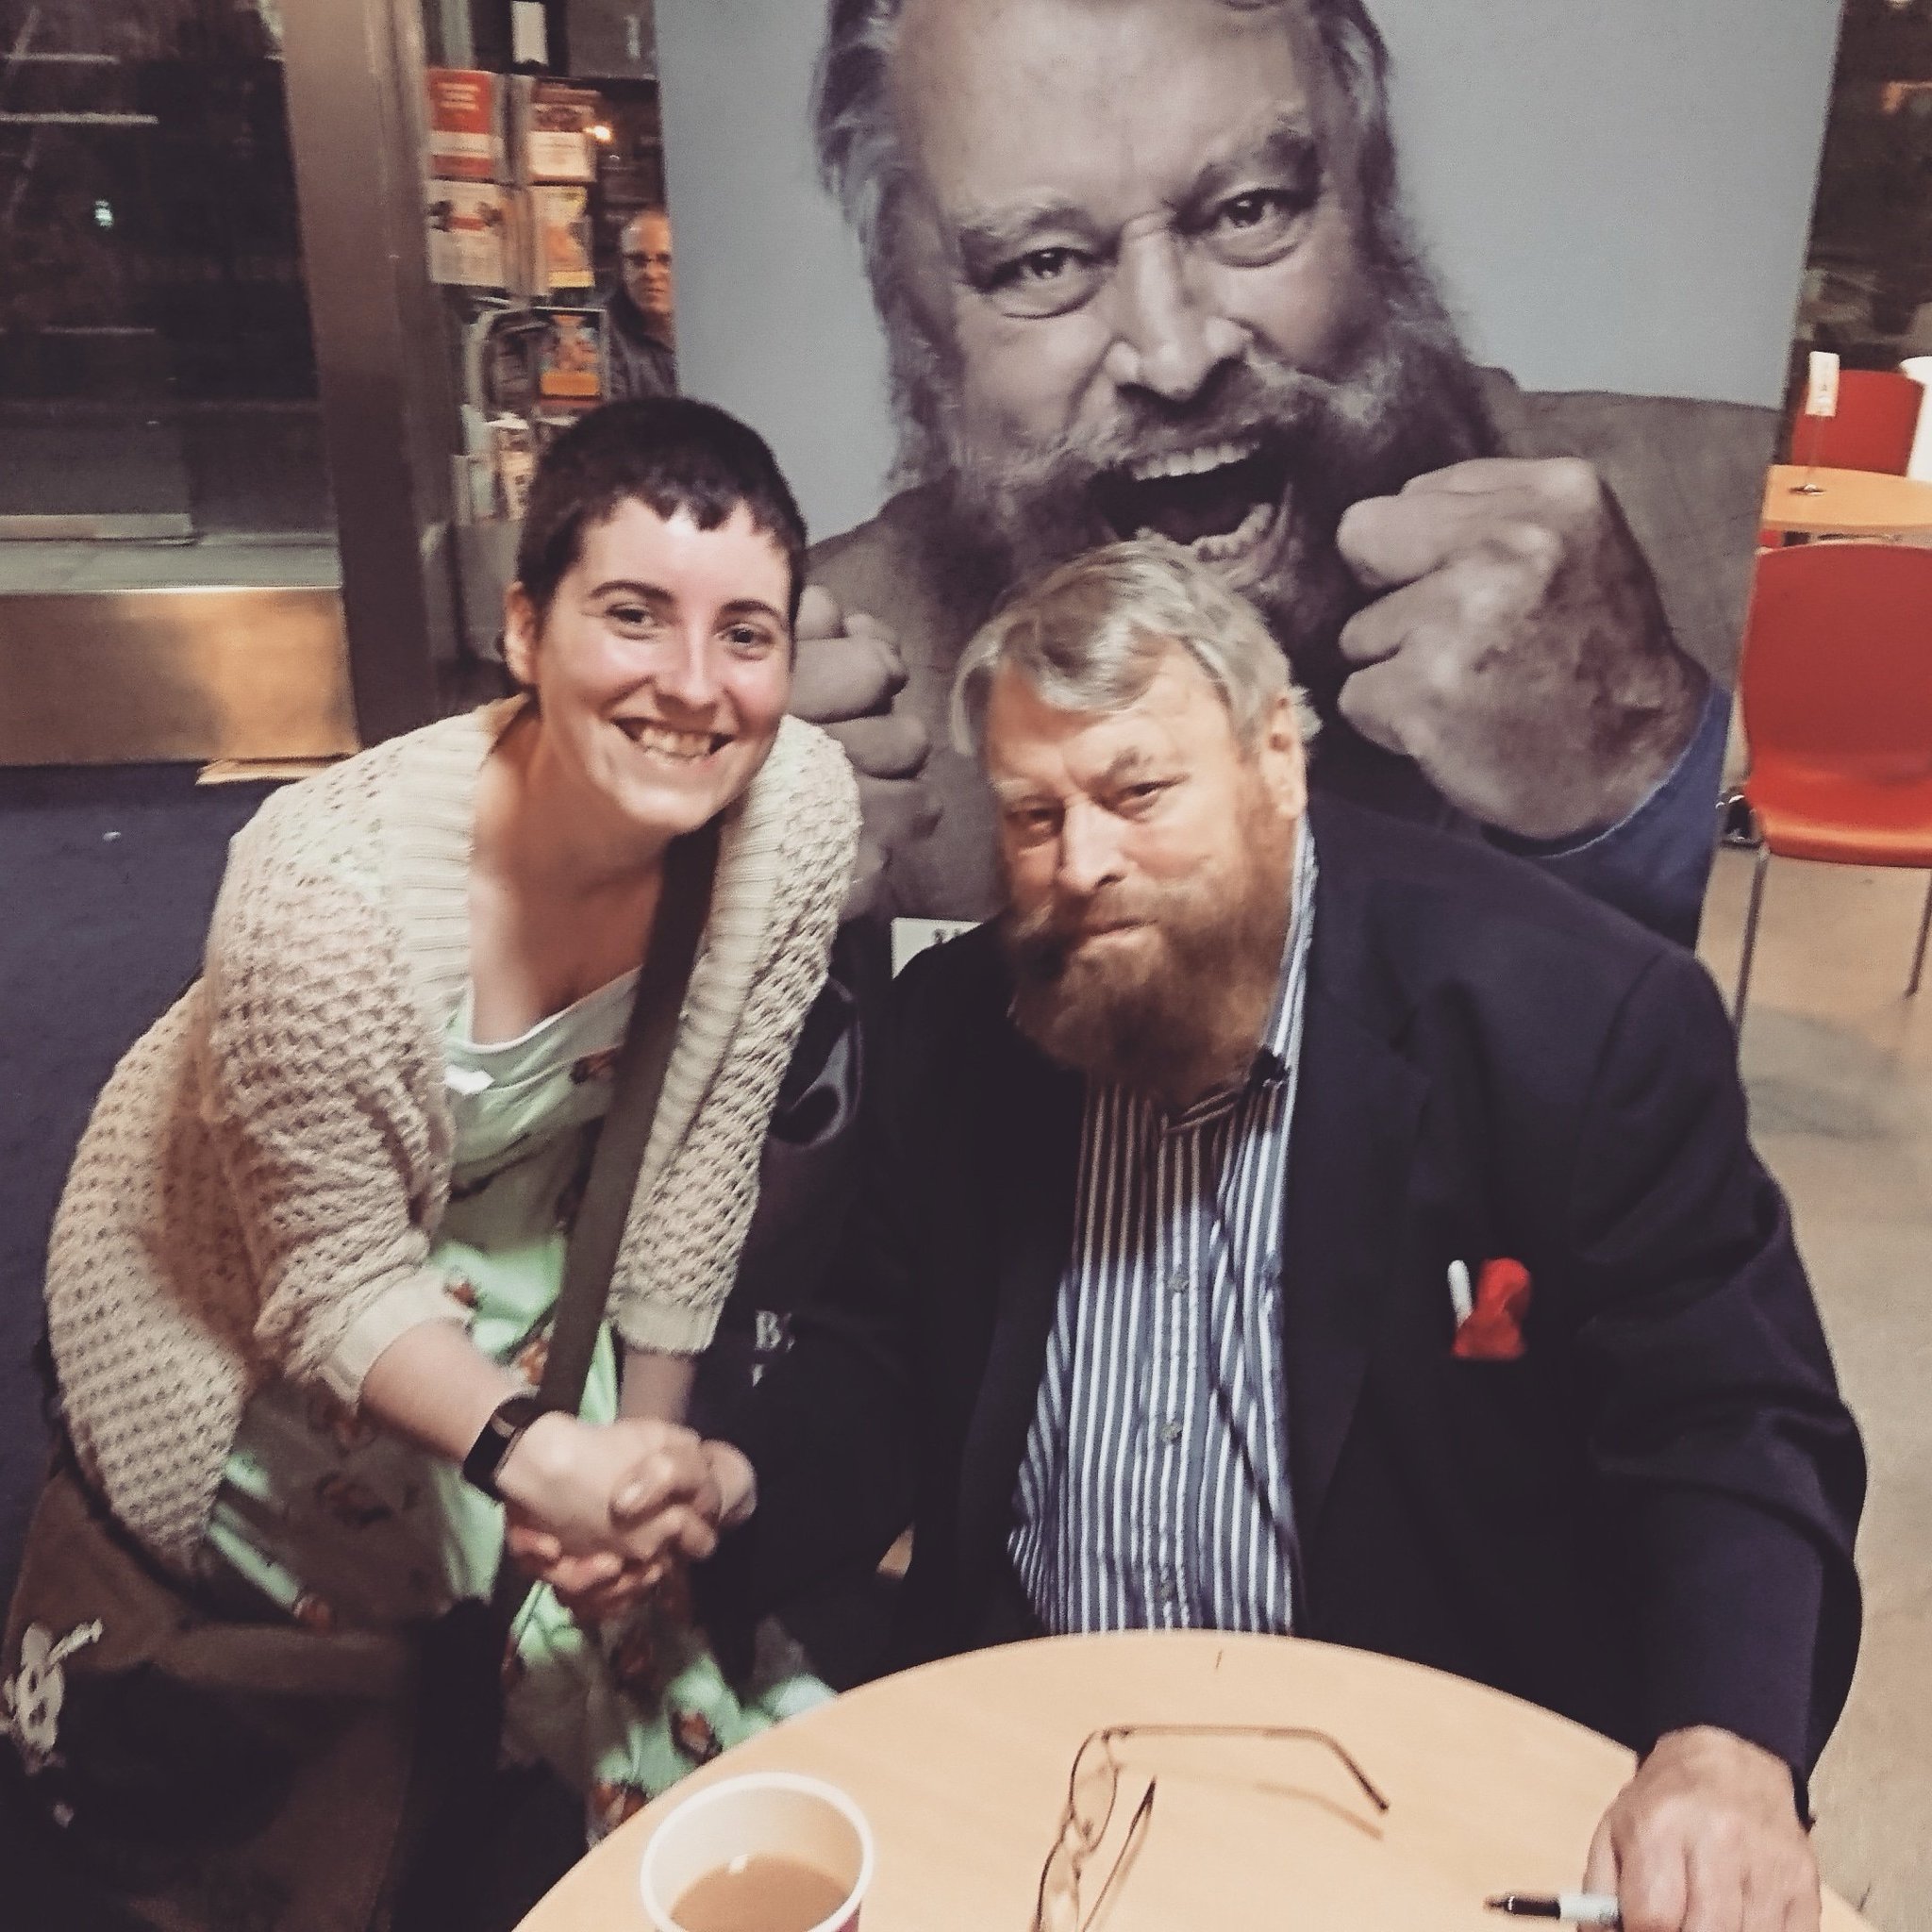 Brian Blessed is 82 years old today. Happy Birthday, you legend!!!! 